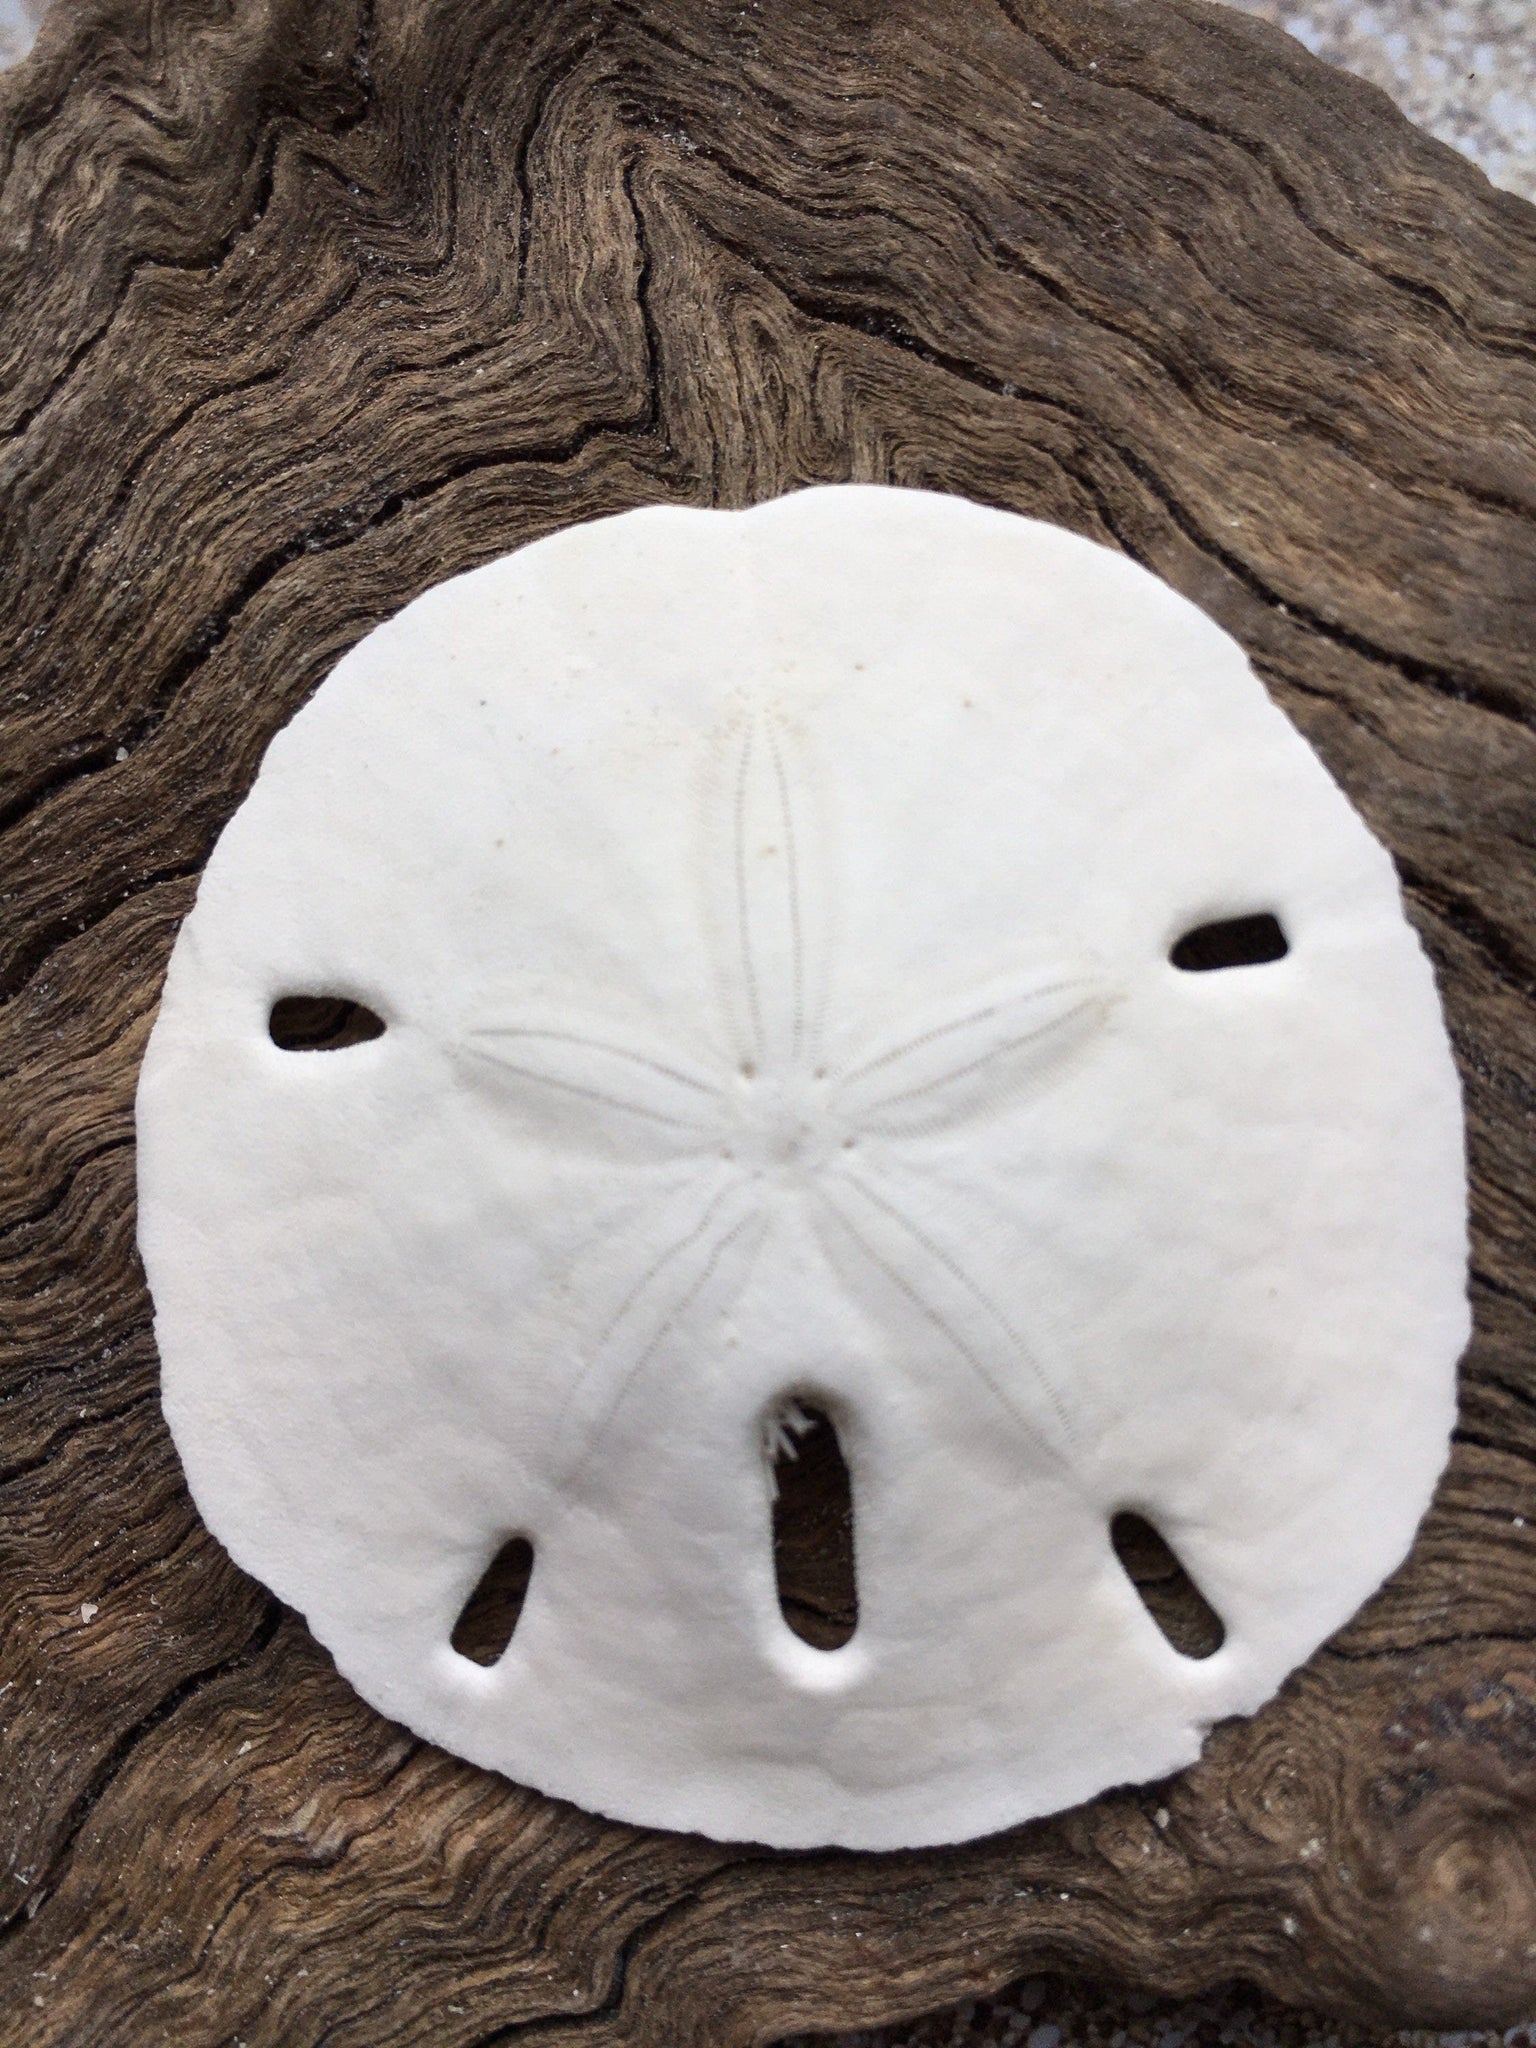  Tumbler Home Sand Dollars 50pcs - Under 1 Inch - Small Natural  White Sand Dollar - Sea Shell for Crafts - Wedding Shells - Bulk Sand  Dollars : Home & Kitchen